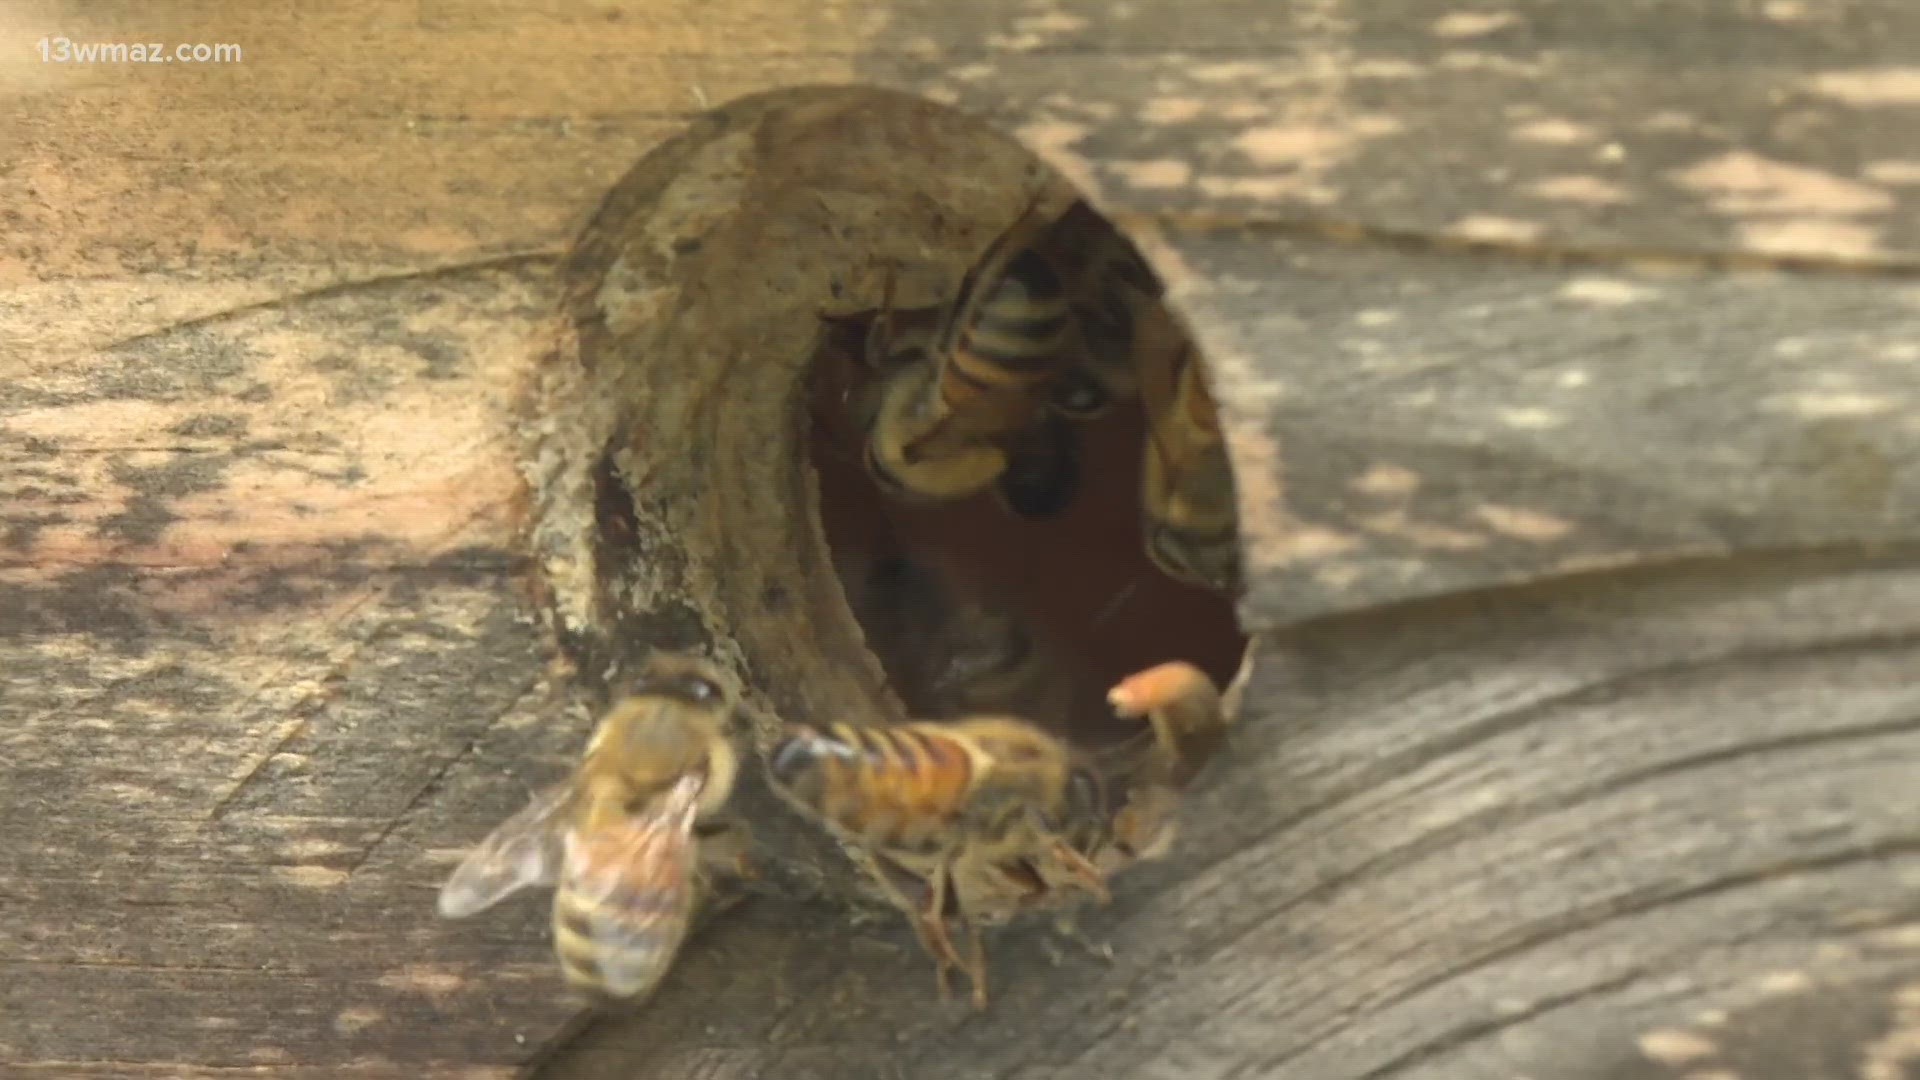 Meteorologist Jordan West talked with beekeepers about how bees interact with weather and how vital they are to Georgia's agriculture.